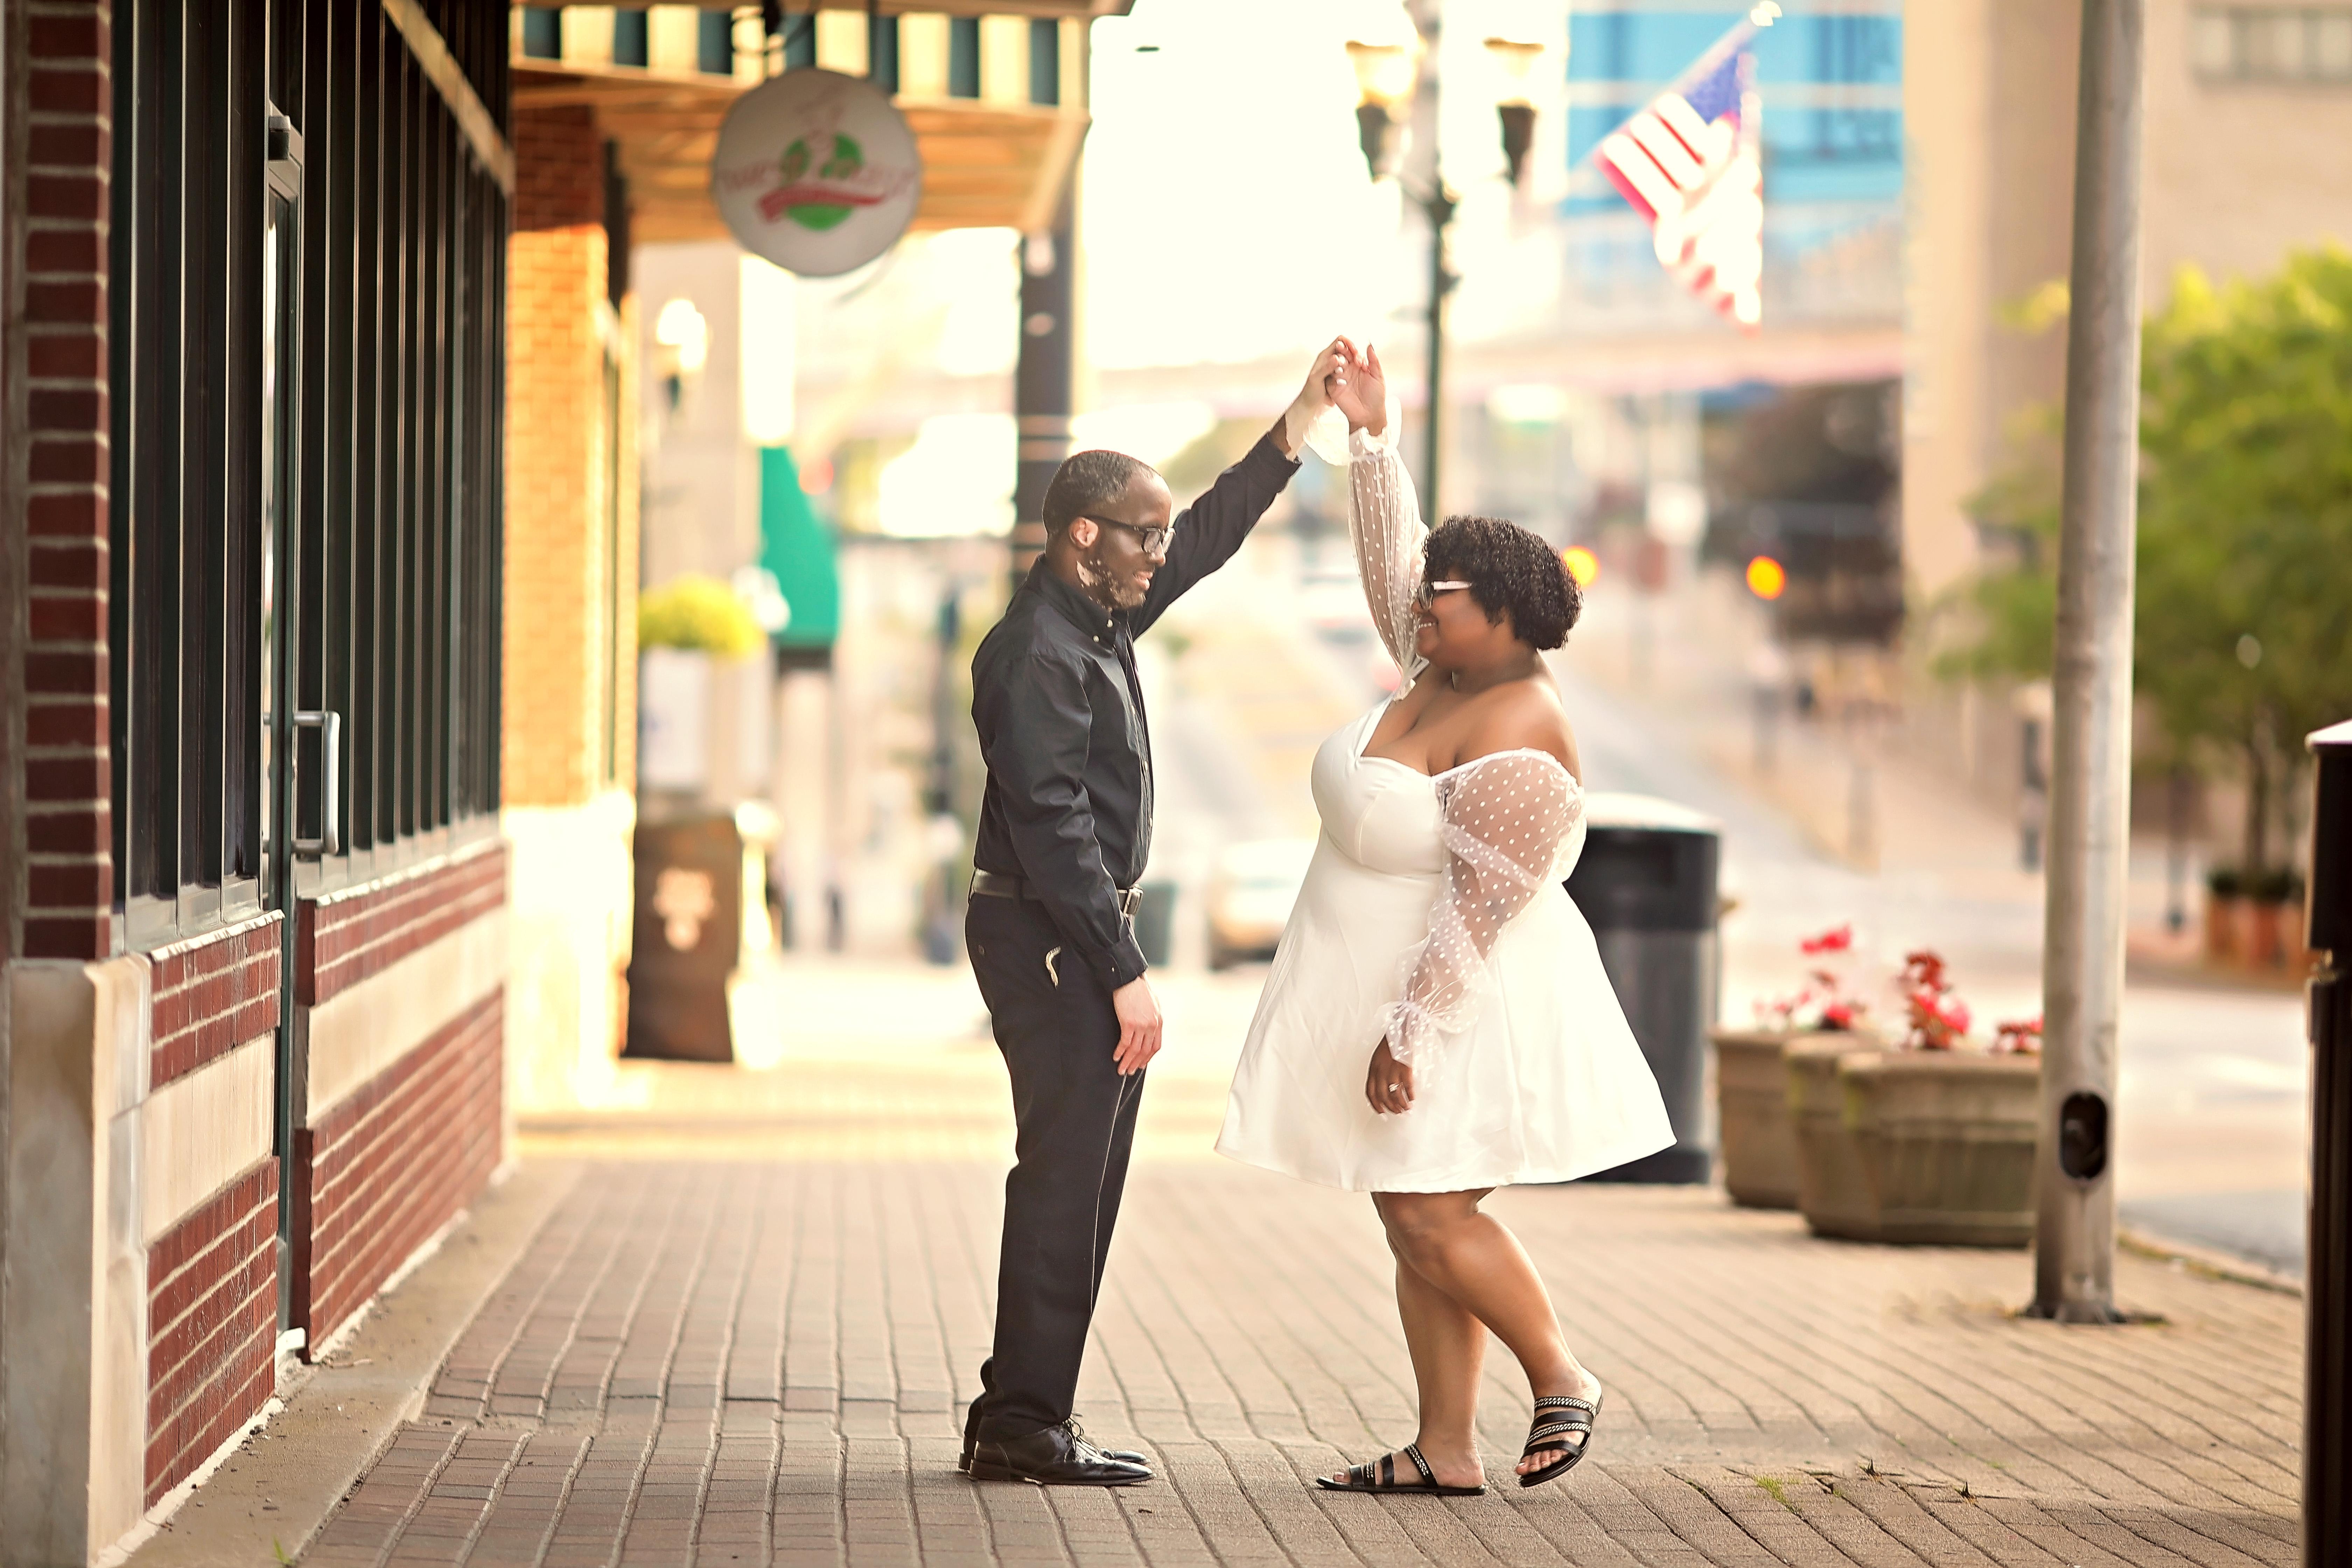 The Wedding Website of Jade McElroy and Kevin Vereen